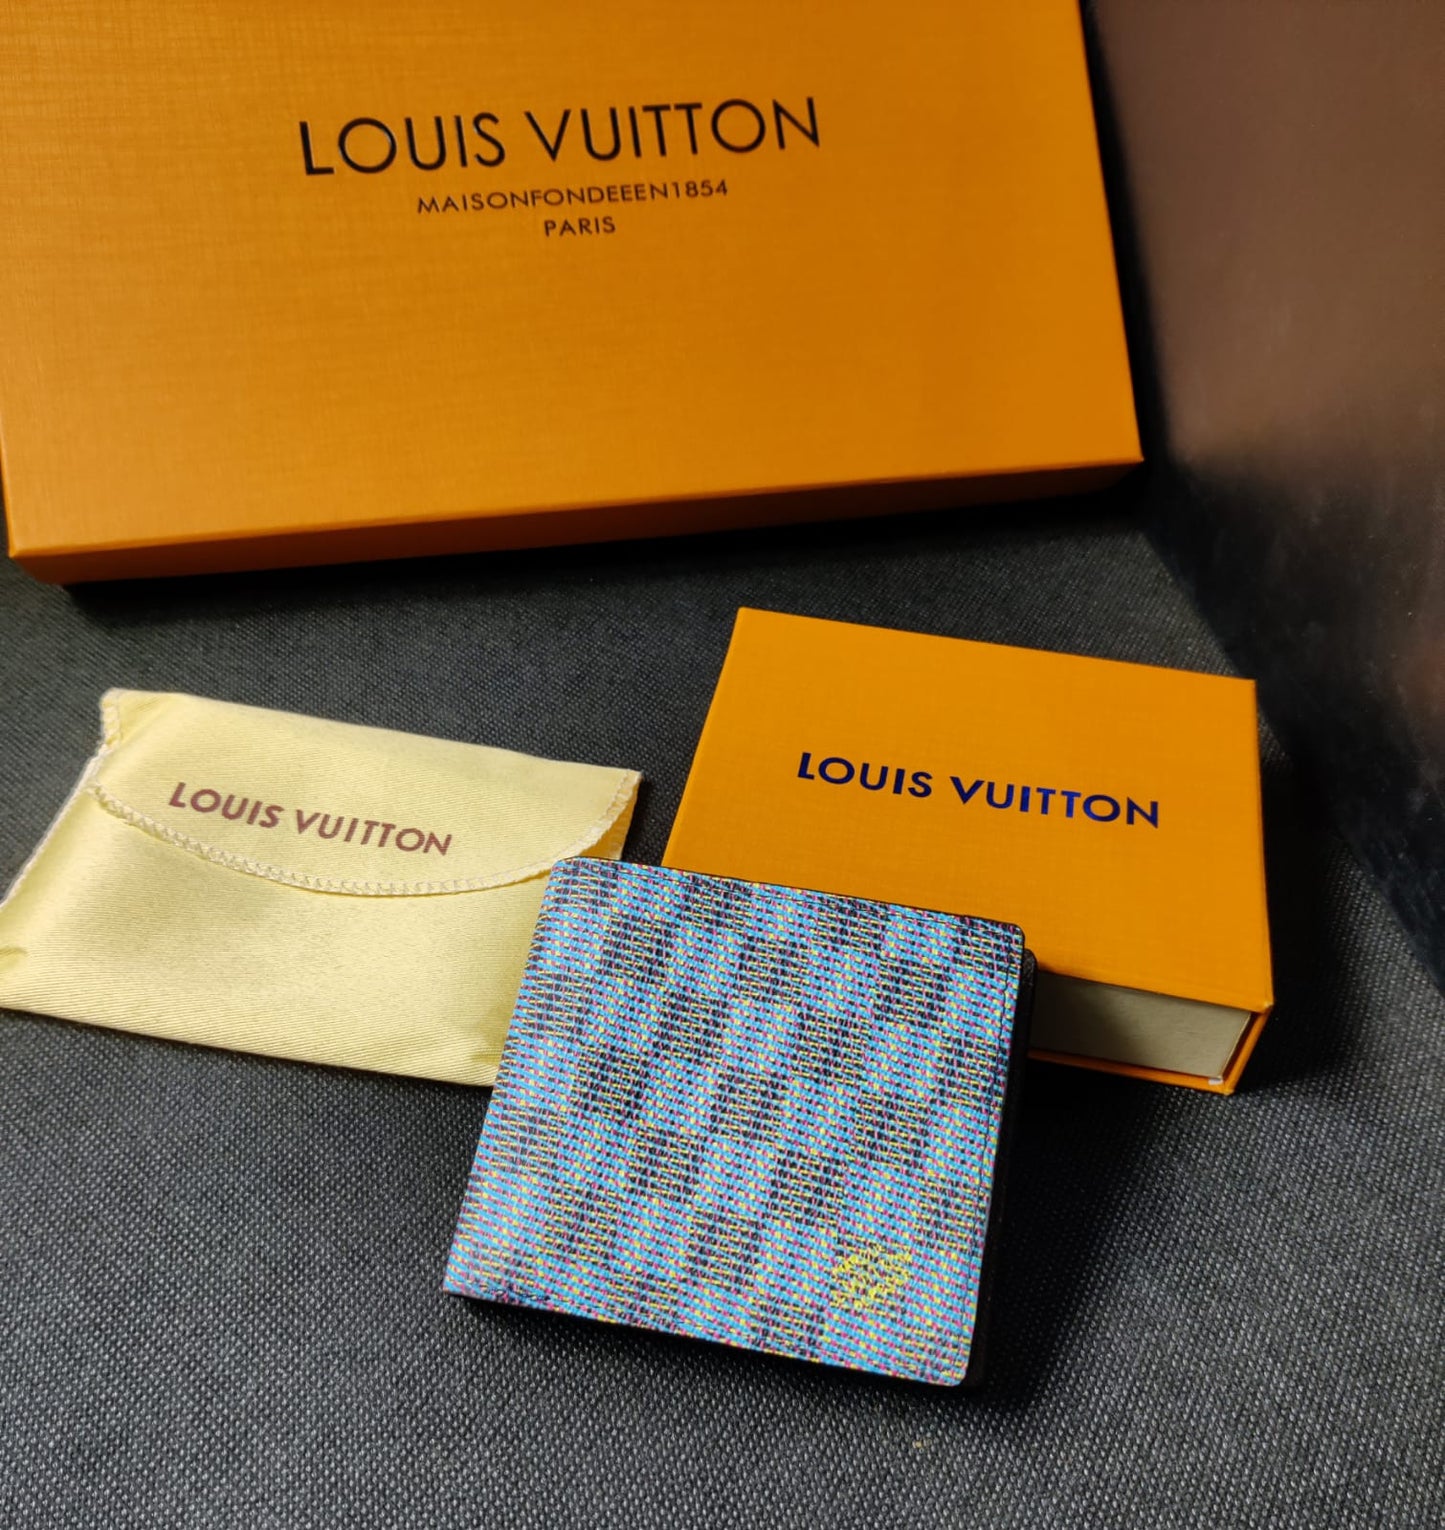 Louis Vuitton Leather Heavy quality latest full printed design Fancy look wallet for men's LV-720